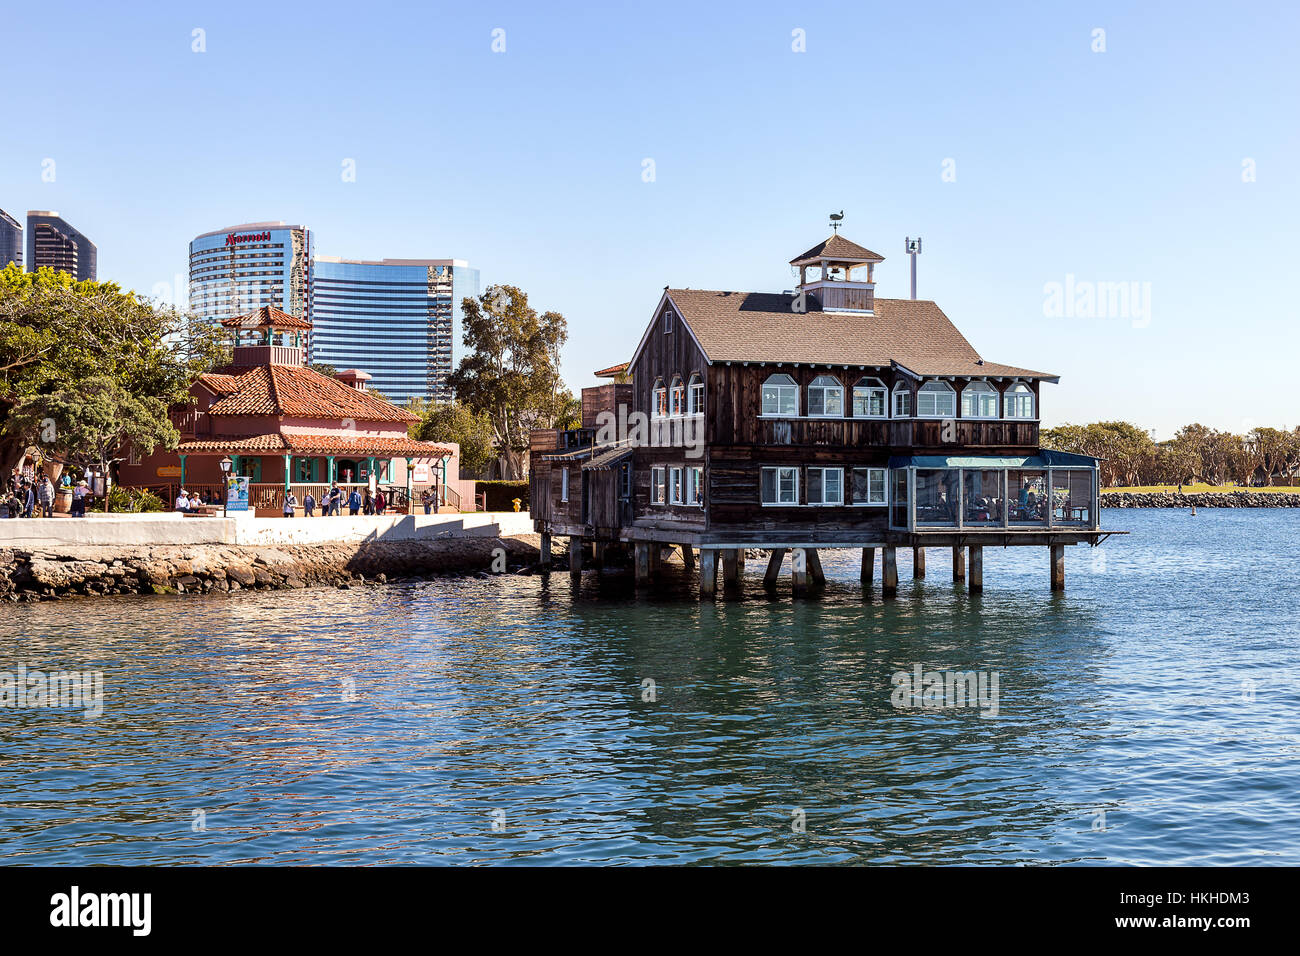 The Pier Cafe at Seaport Village in San Diego, California Stock Photo